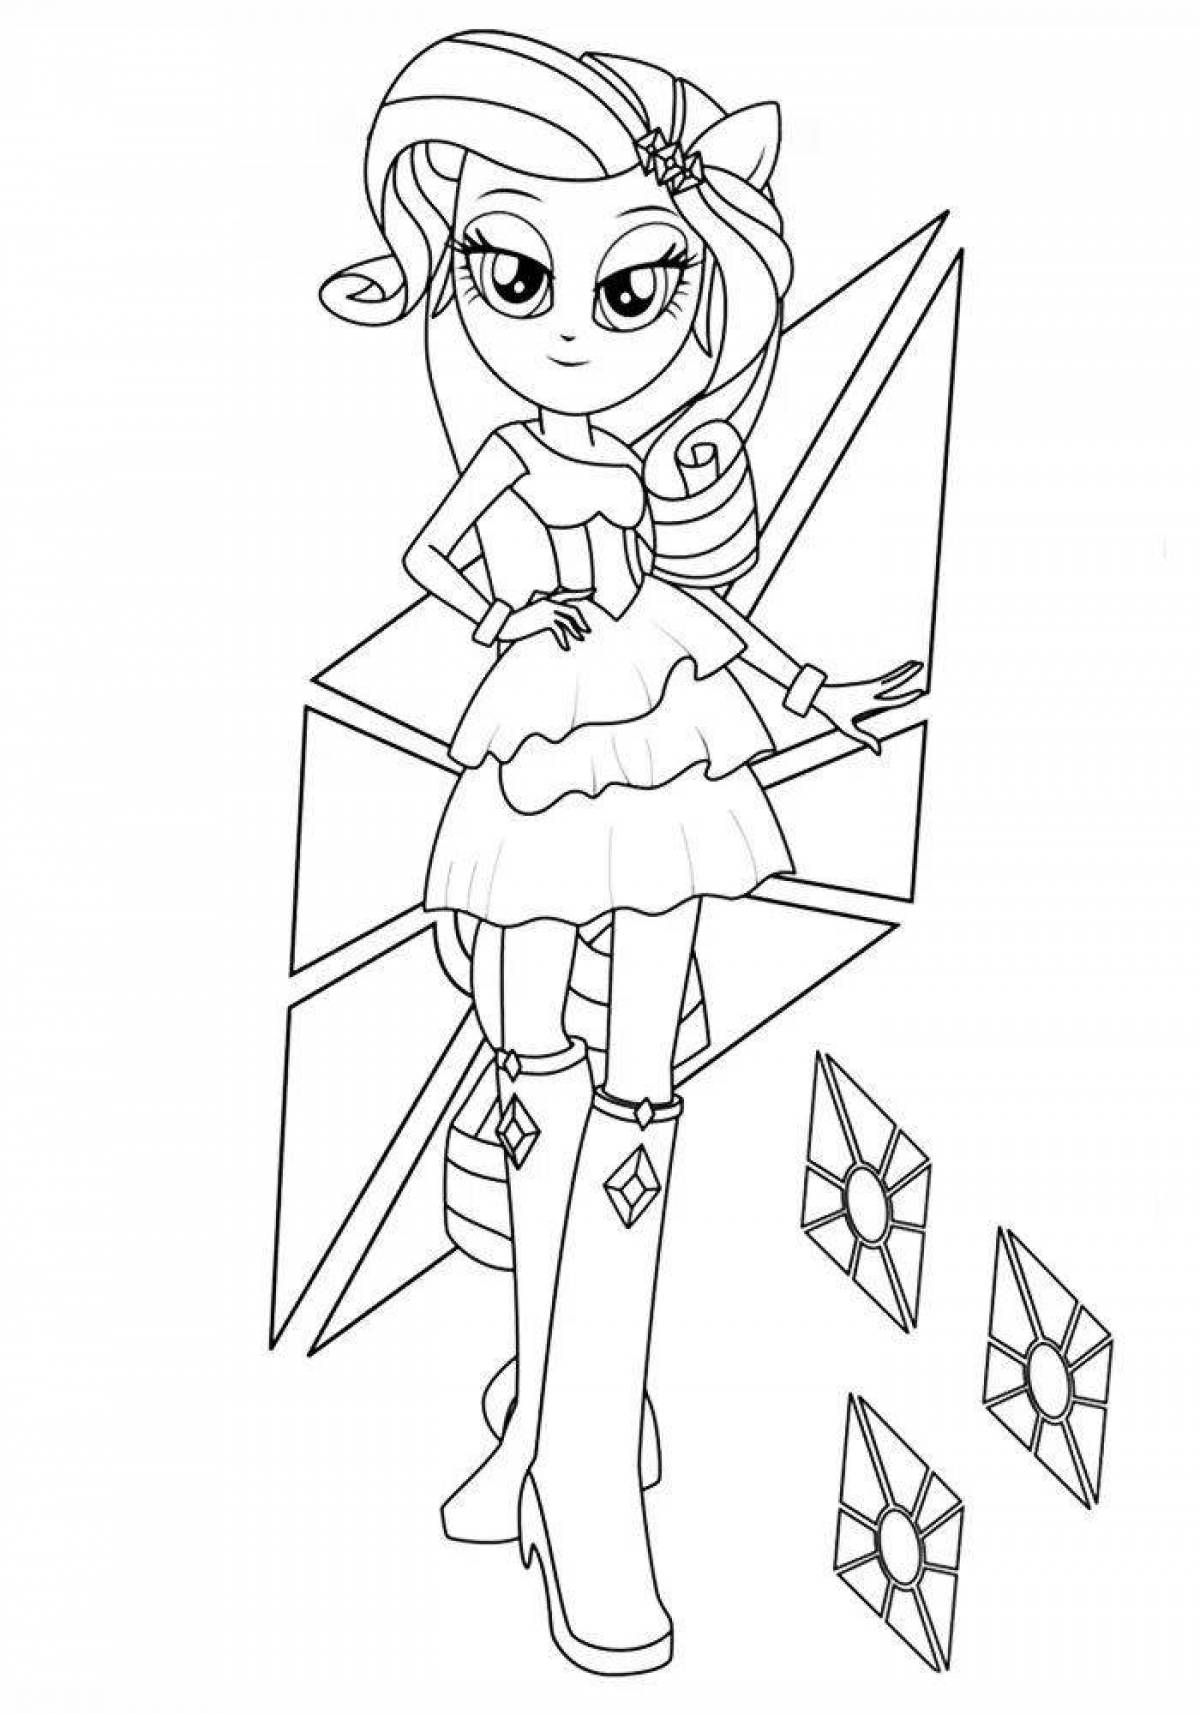 Playtime coloring page pony my little pony equestria